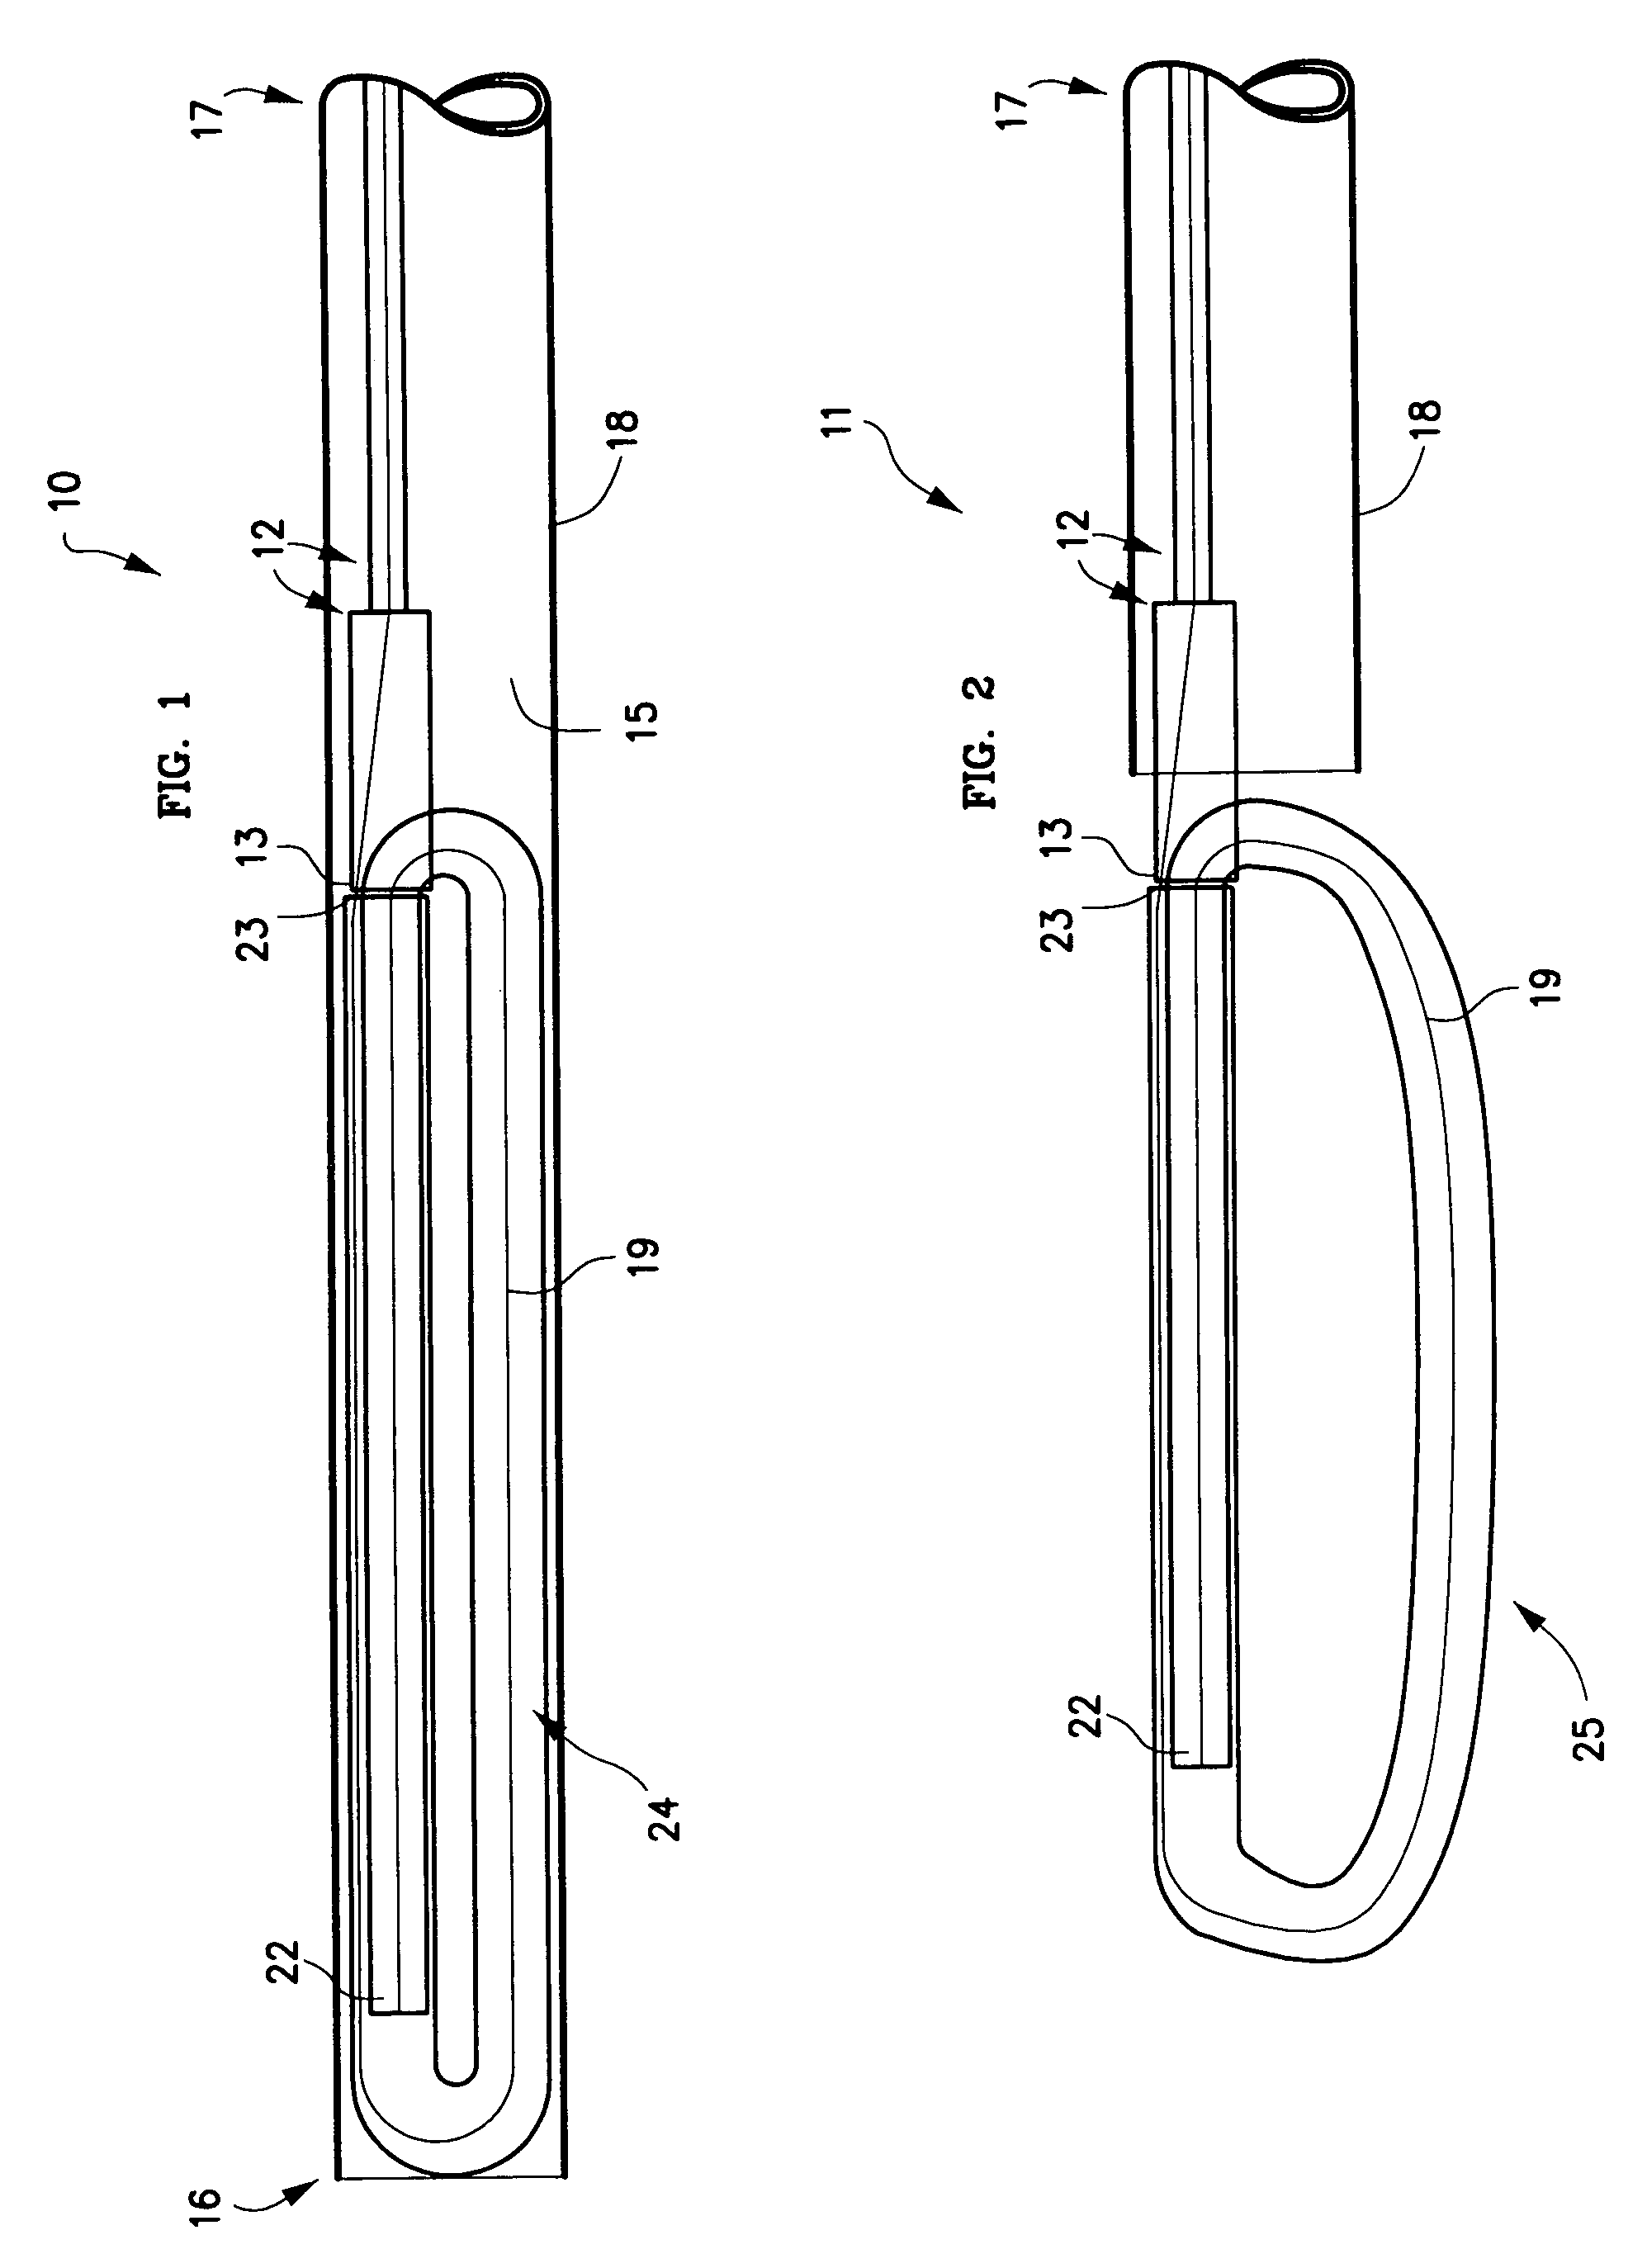 Mechanical apparatus and method for artificial disc replacement